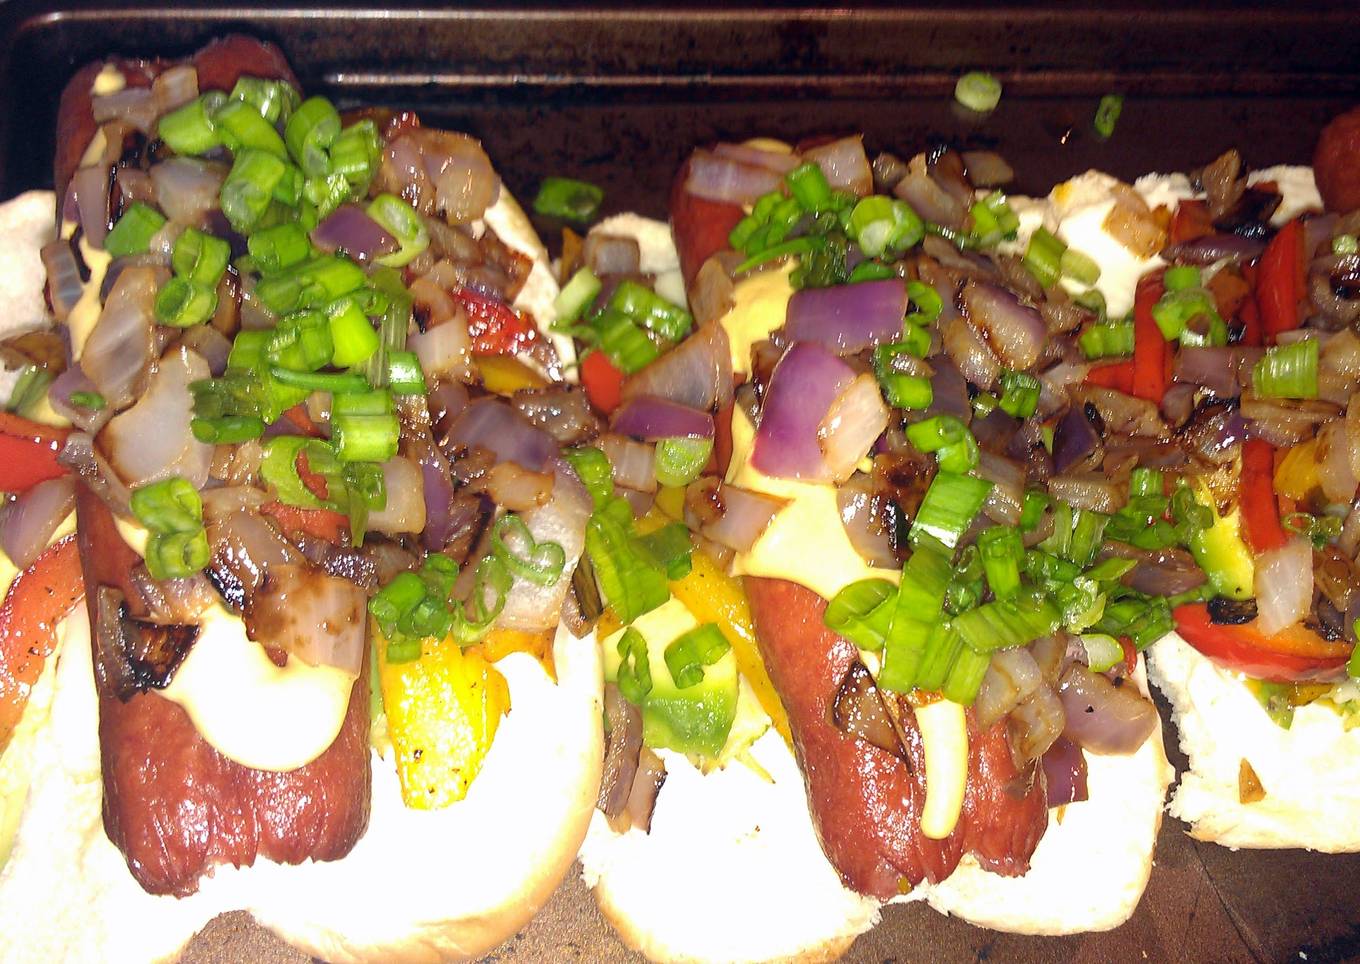 A healthy and delicious way to eat hot dogs.